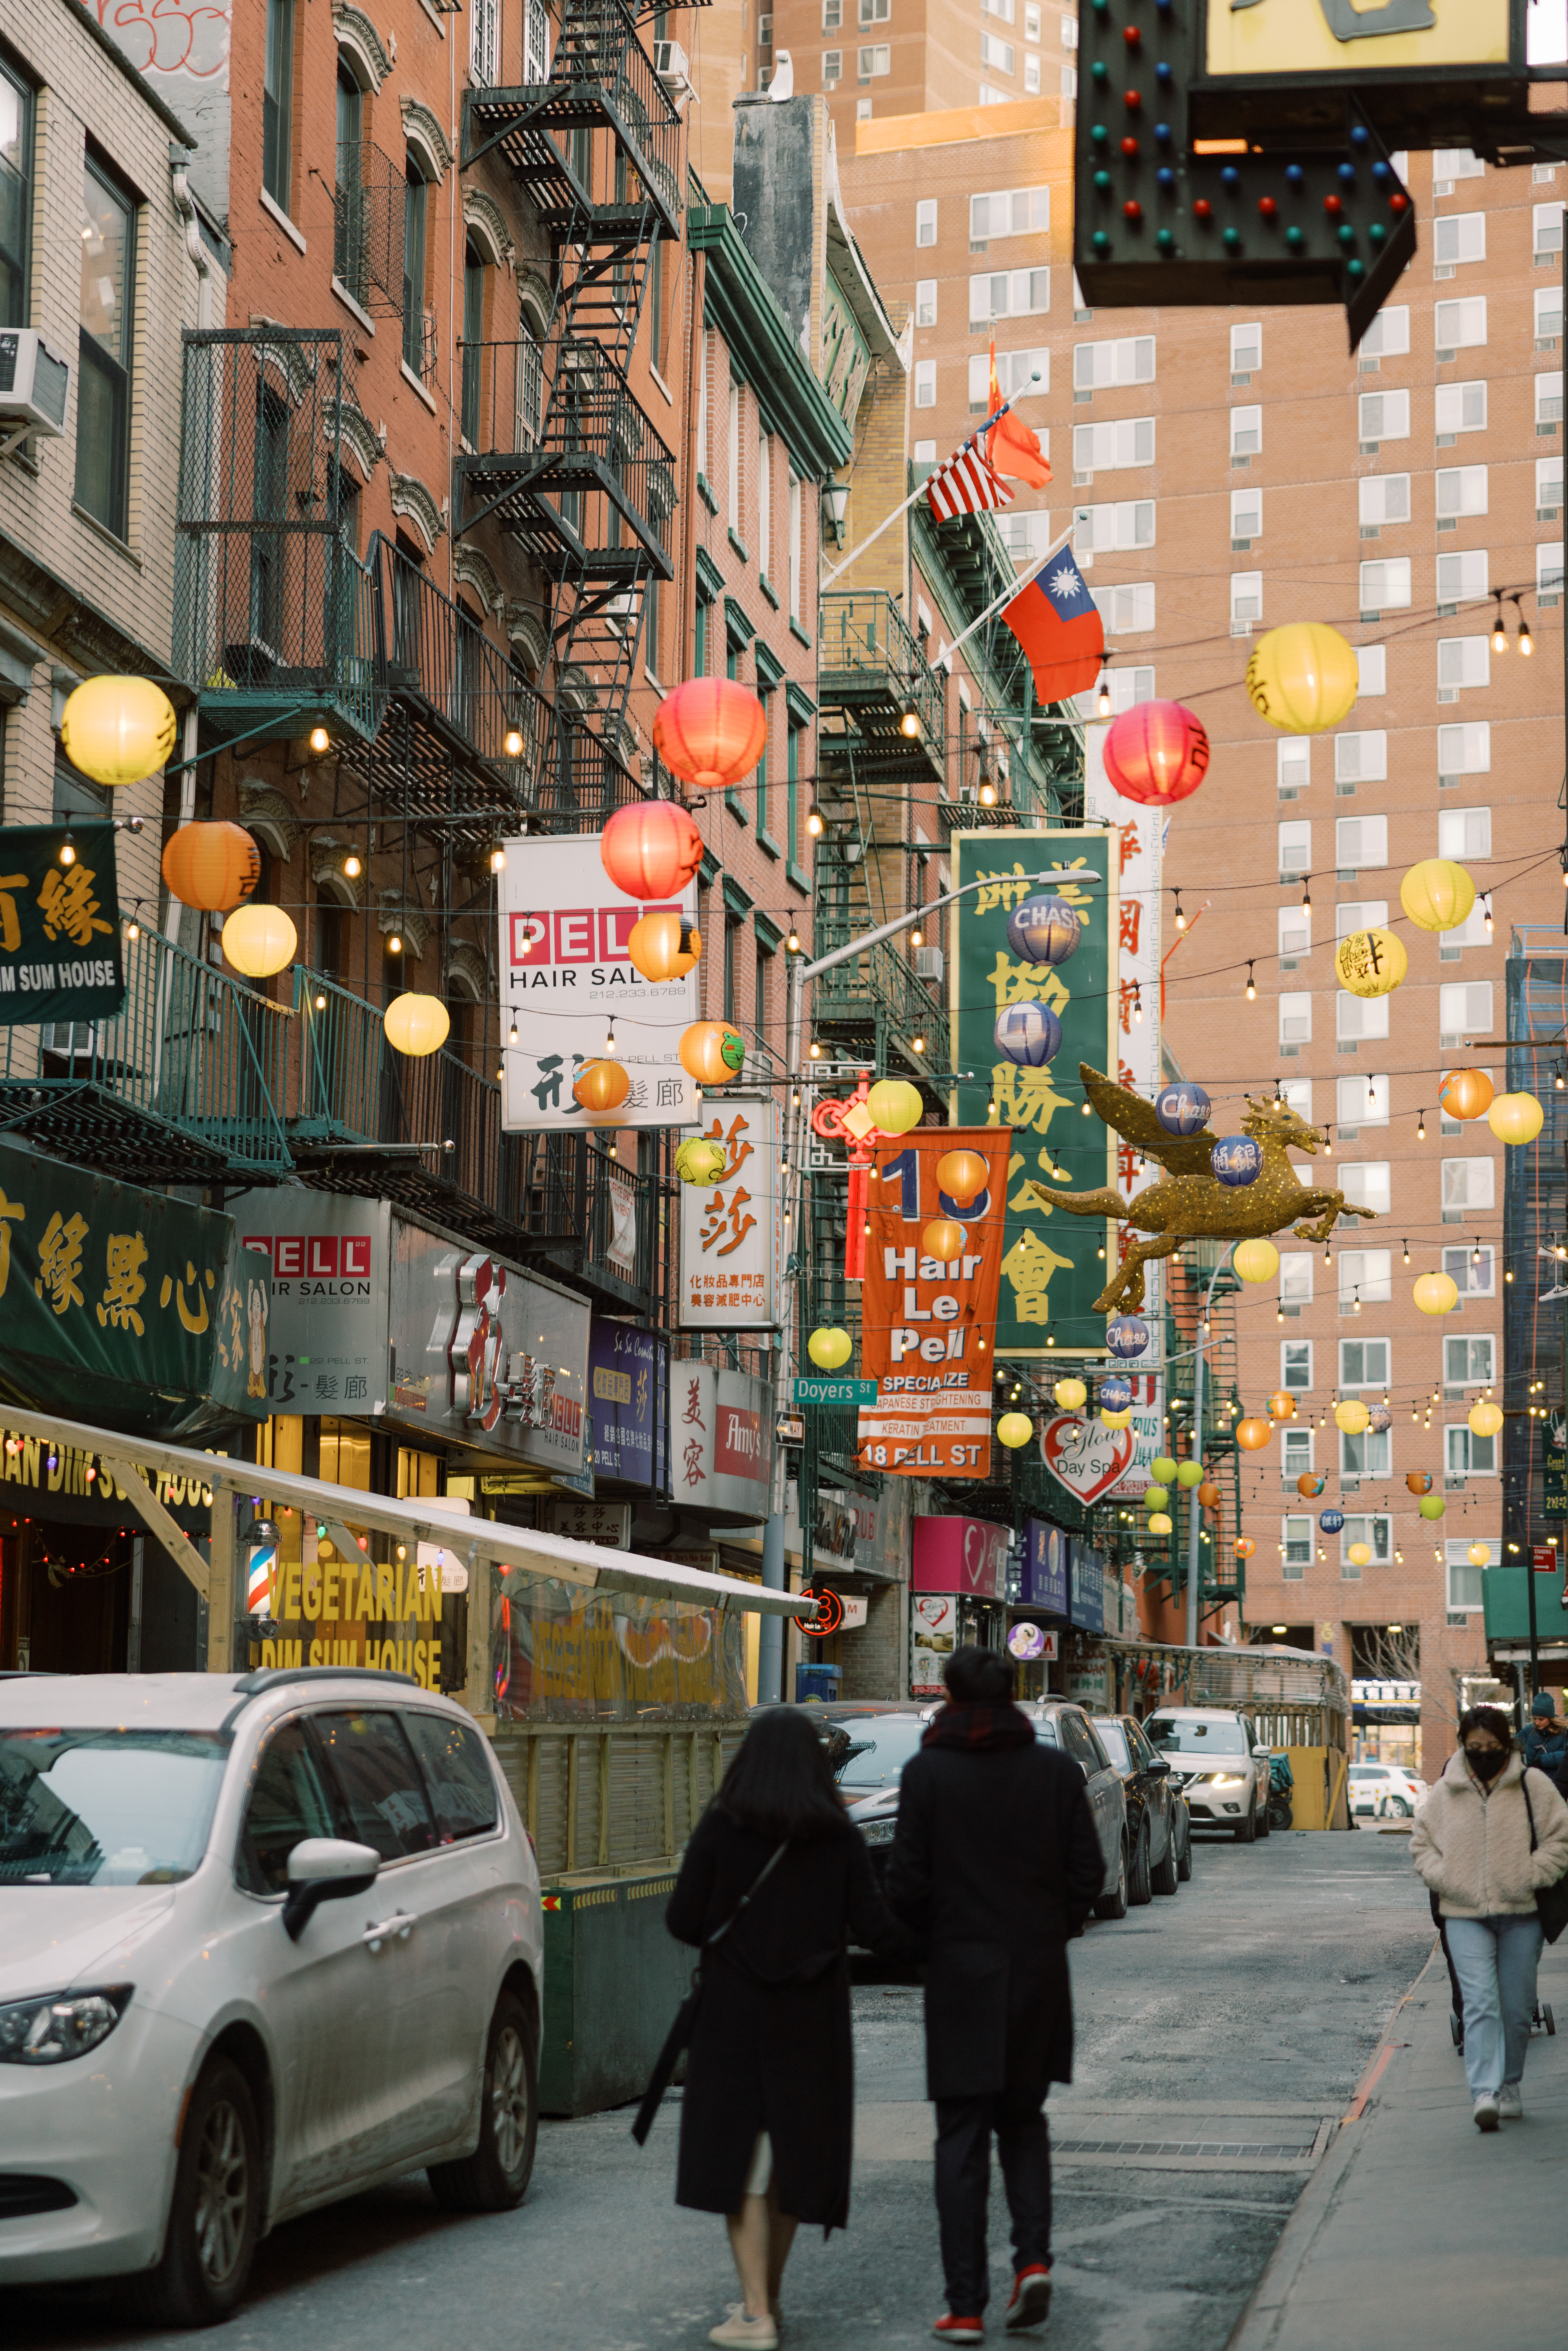 The newly-weds are walking in the colorful Chinatown in NYC. Image by Jenny Fu Studio